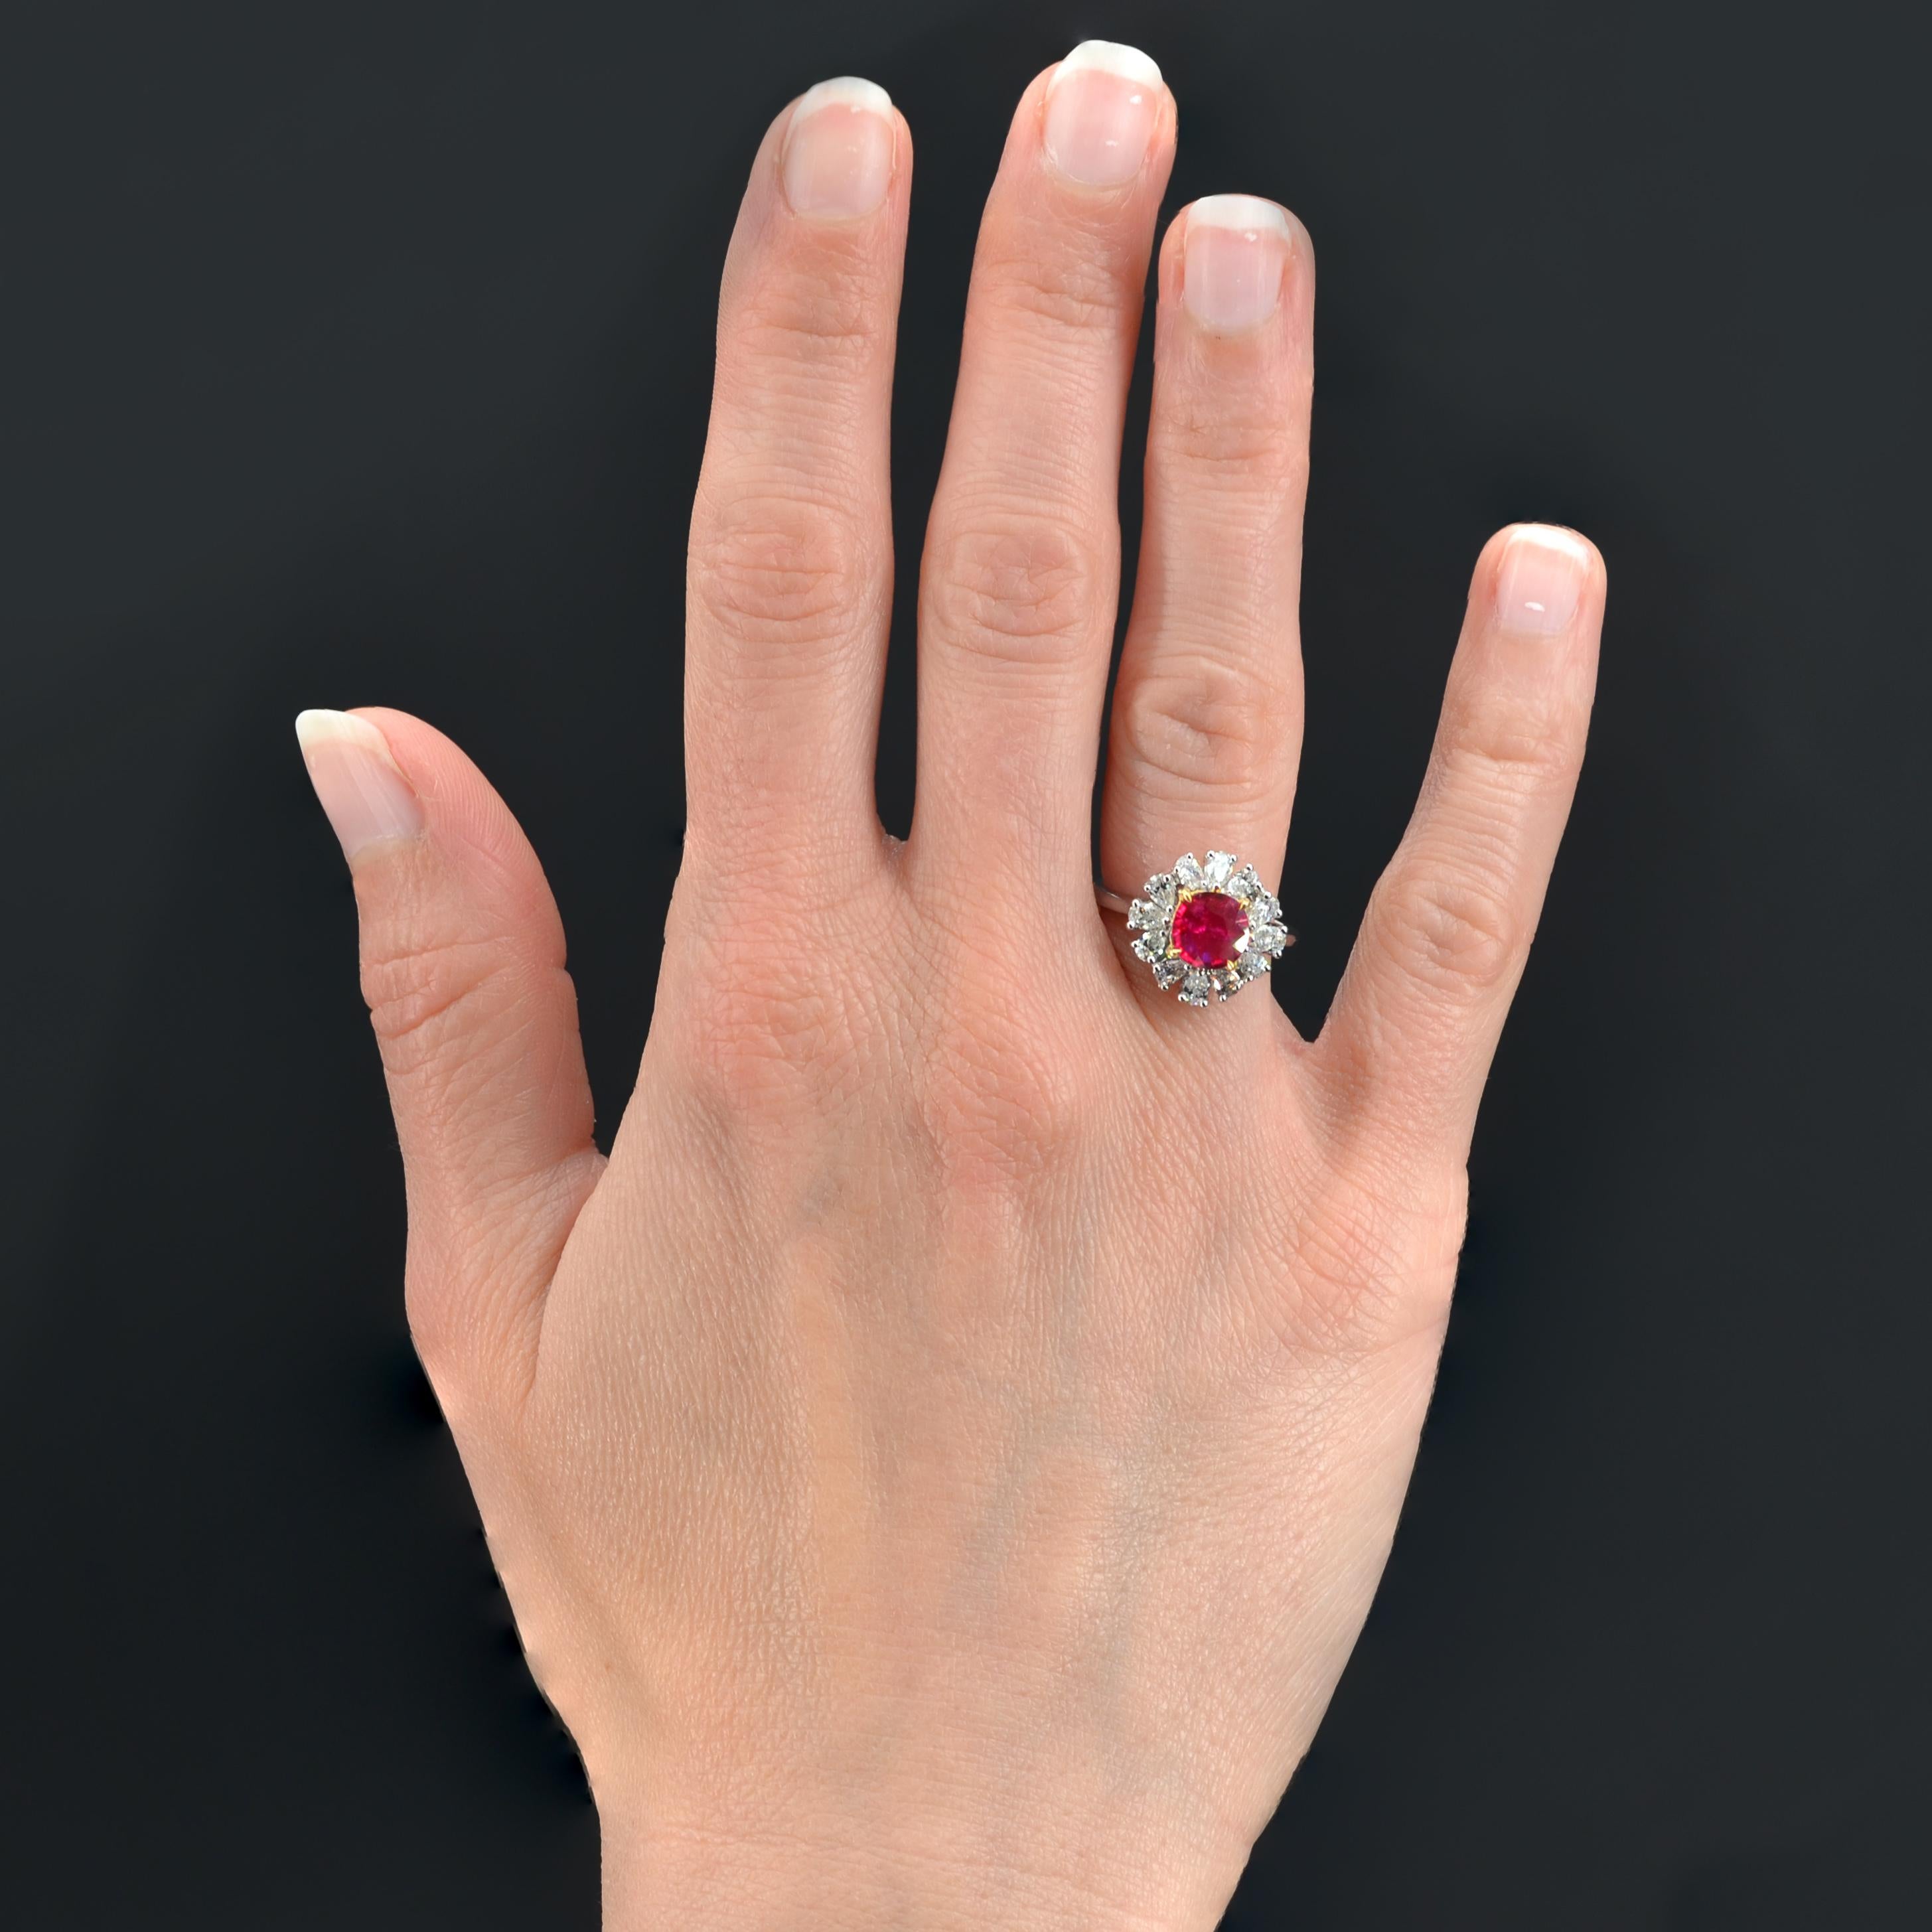 Ring in 18 karat white gold, eagle head hallmark.
Feminine flower ring, it is set with claws of yellow gold on its top, a round ruby in a surround of pear-shaped diamonds also set with claws. The basket is made of gold wire.
Weight of the ruby :